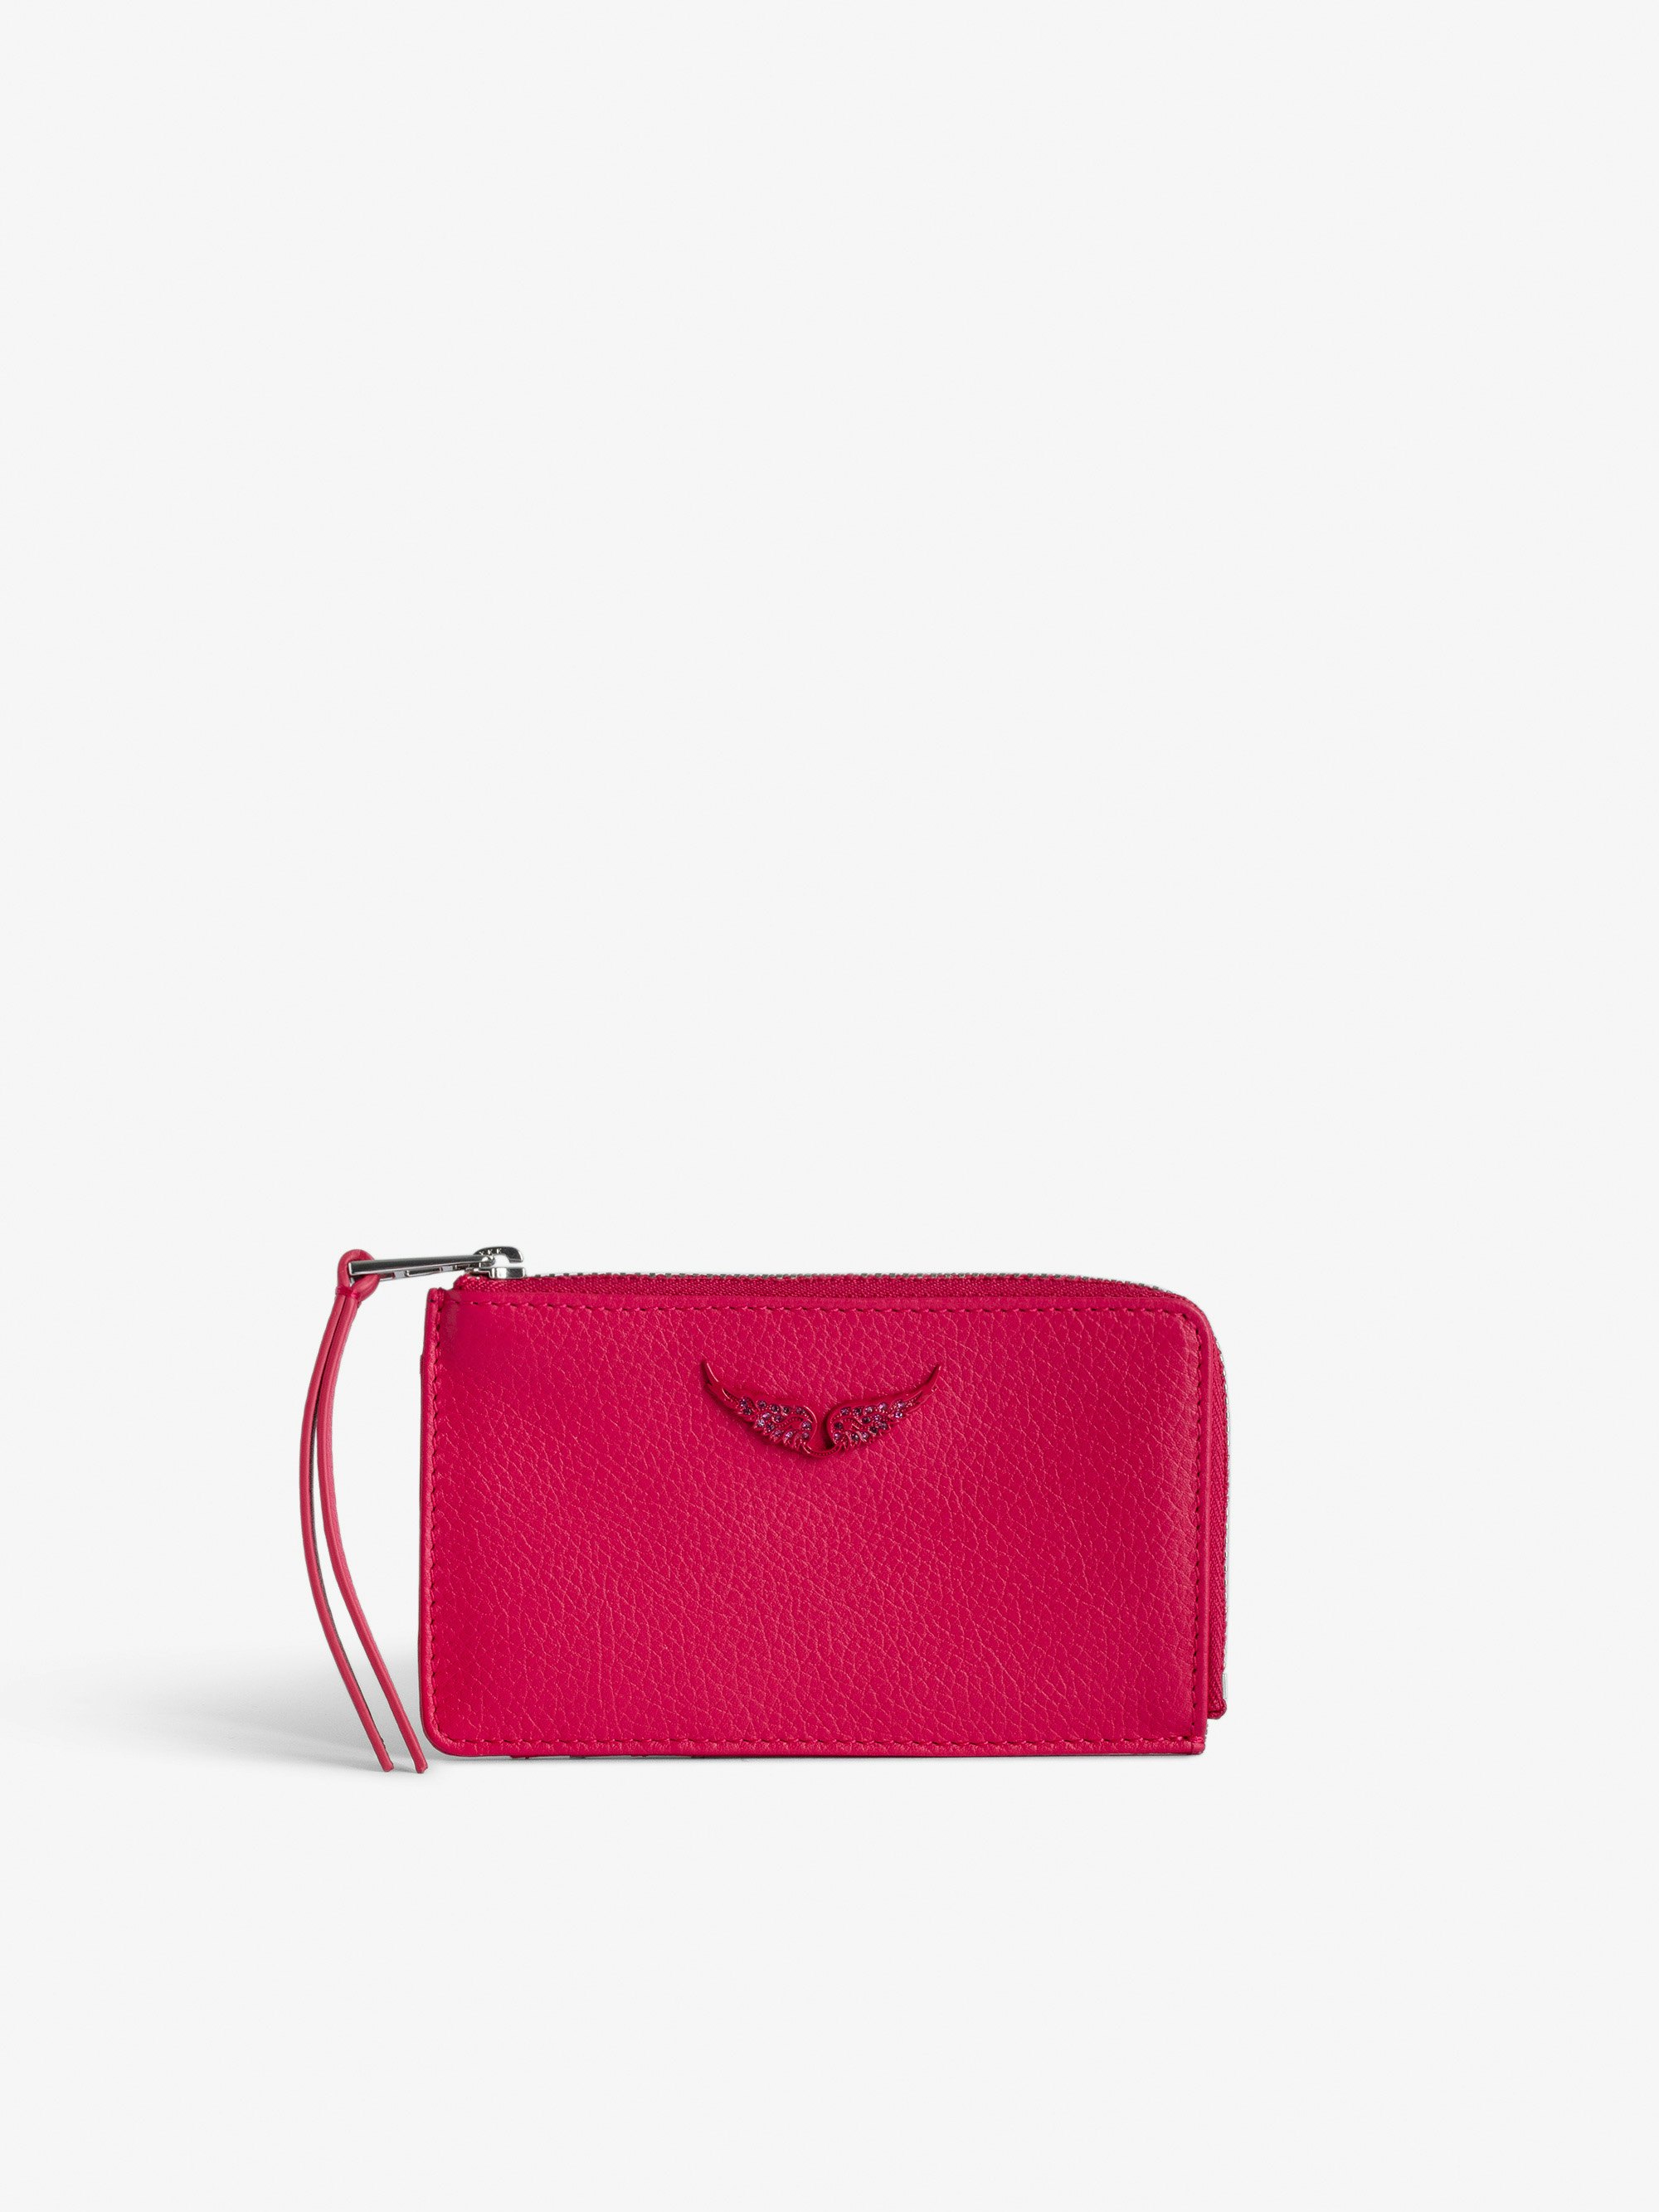 ZV Card Card Holder - Women’s pink grained leather card holder with wings charm.